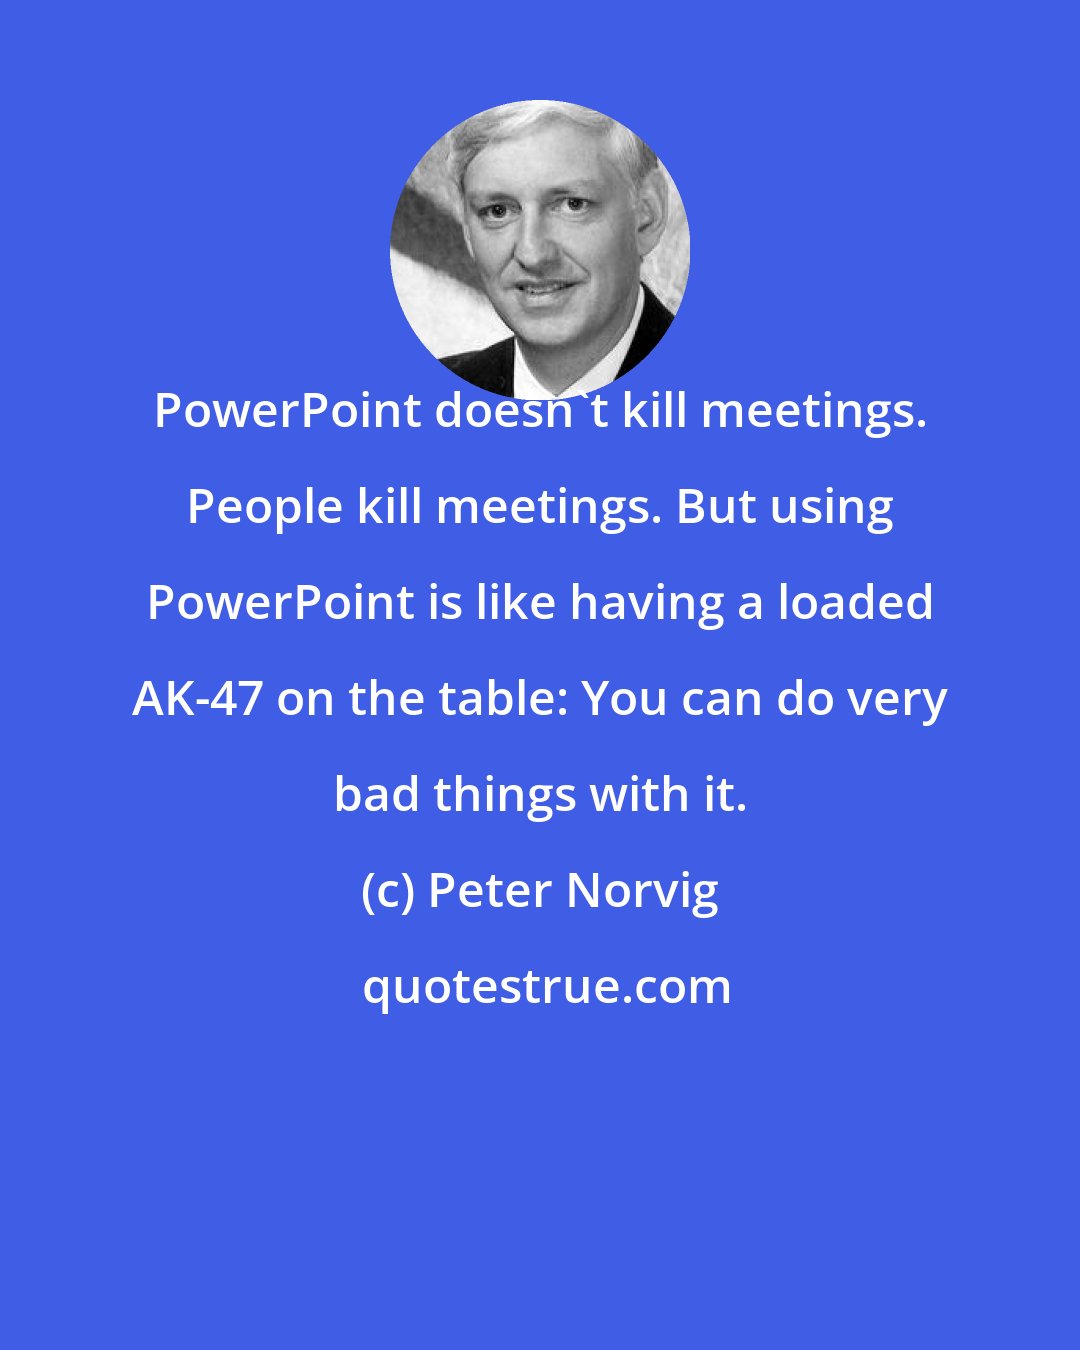 Peter Norvig: PowerPoint doesn't kill meetings. People kill meetings. But using PowerPoint is like having a loaded AK-47 on the table: You can do very bad things with it.